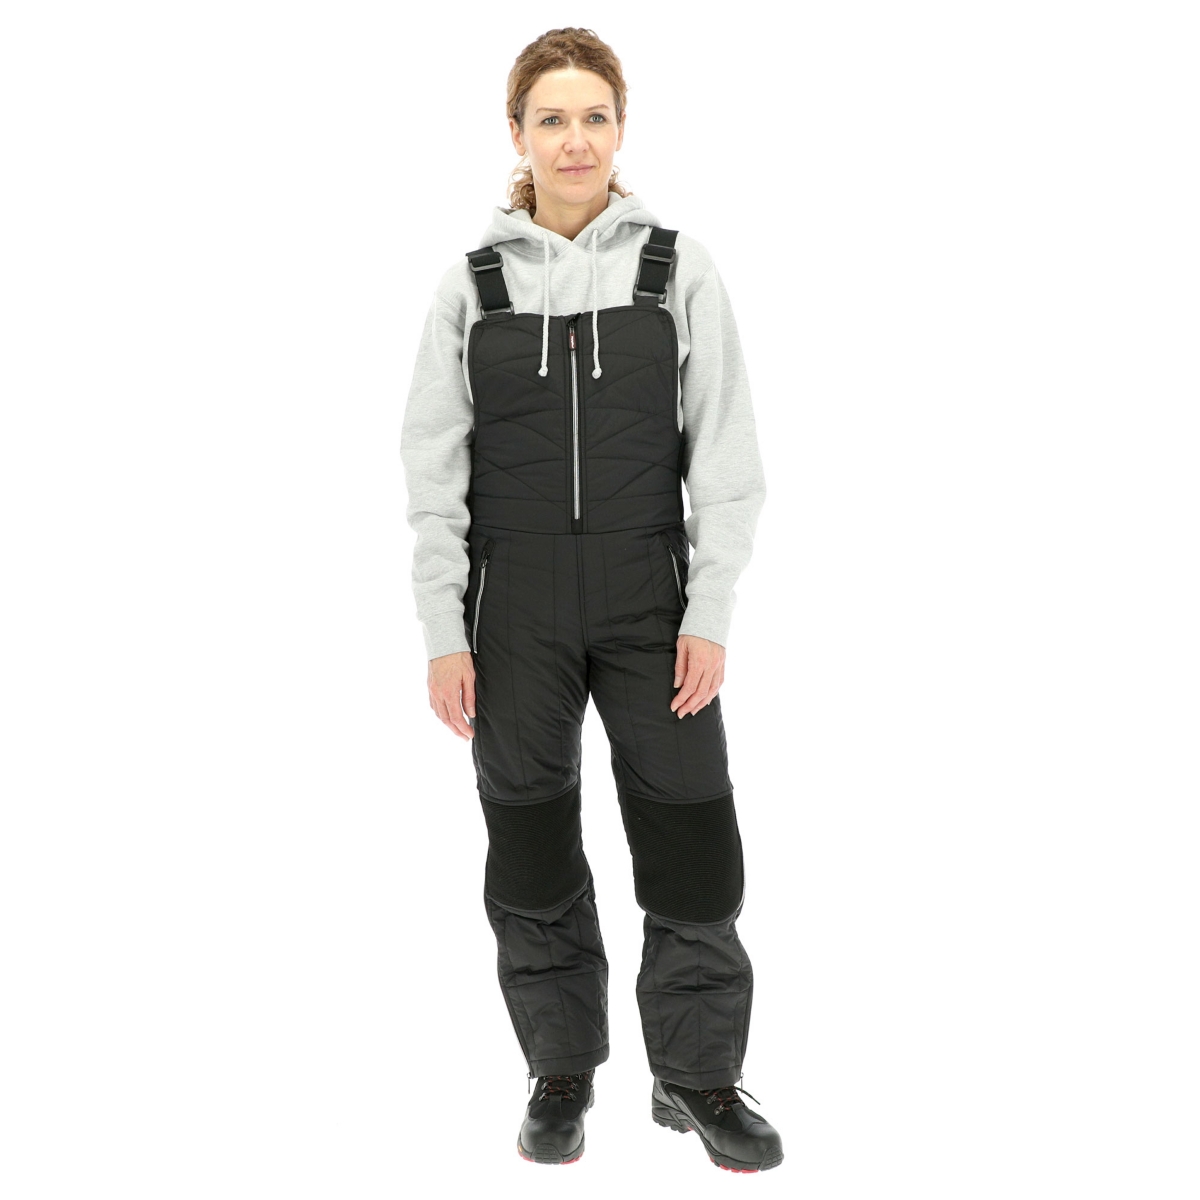 Women's Diamond Quilted Insulated Bib Overalls with Performance-Flex - Black